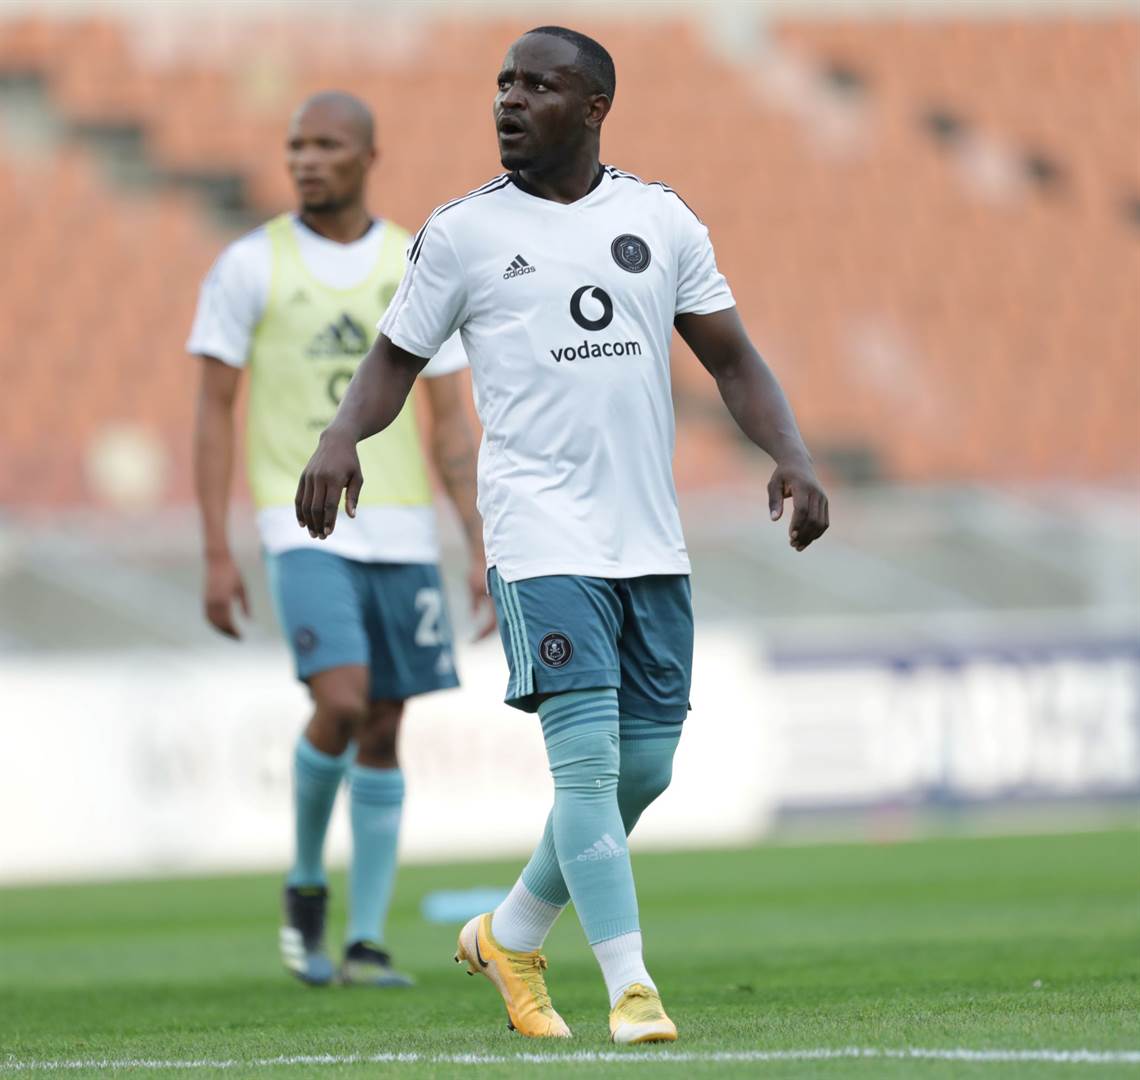 Mhango must now provide goals following his return